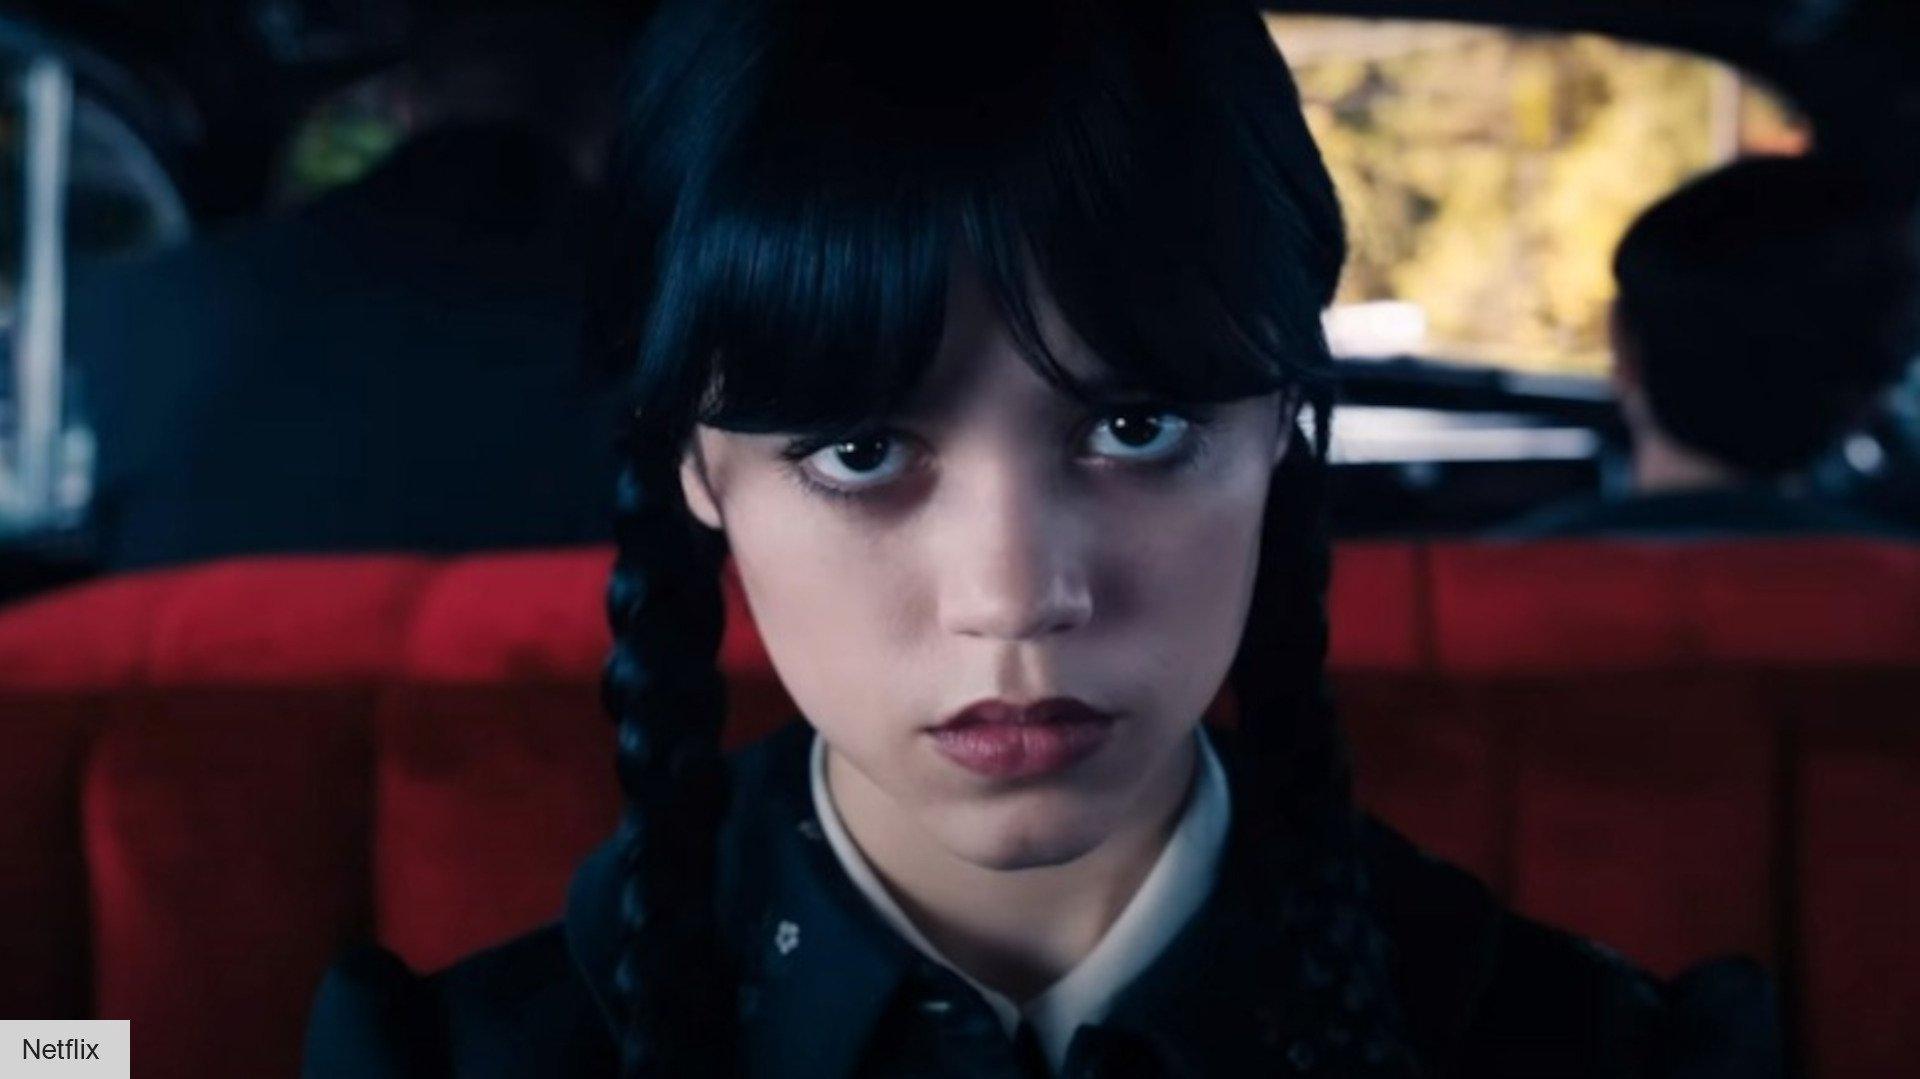 Who Is Playing Wednesday Addams In The Flix Series